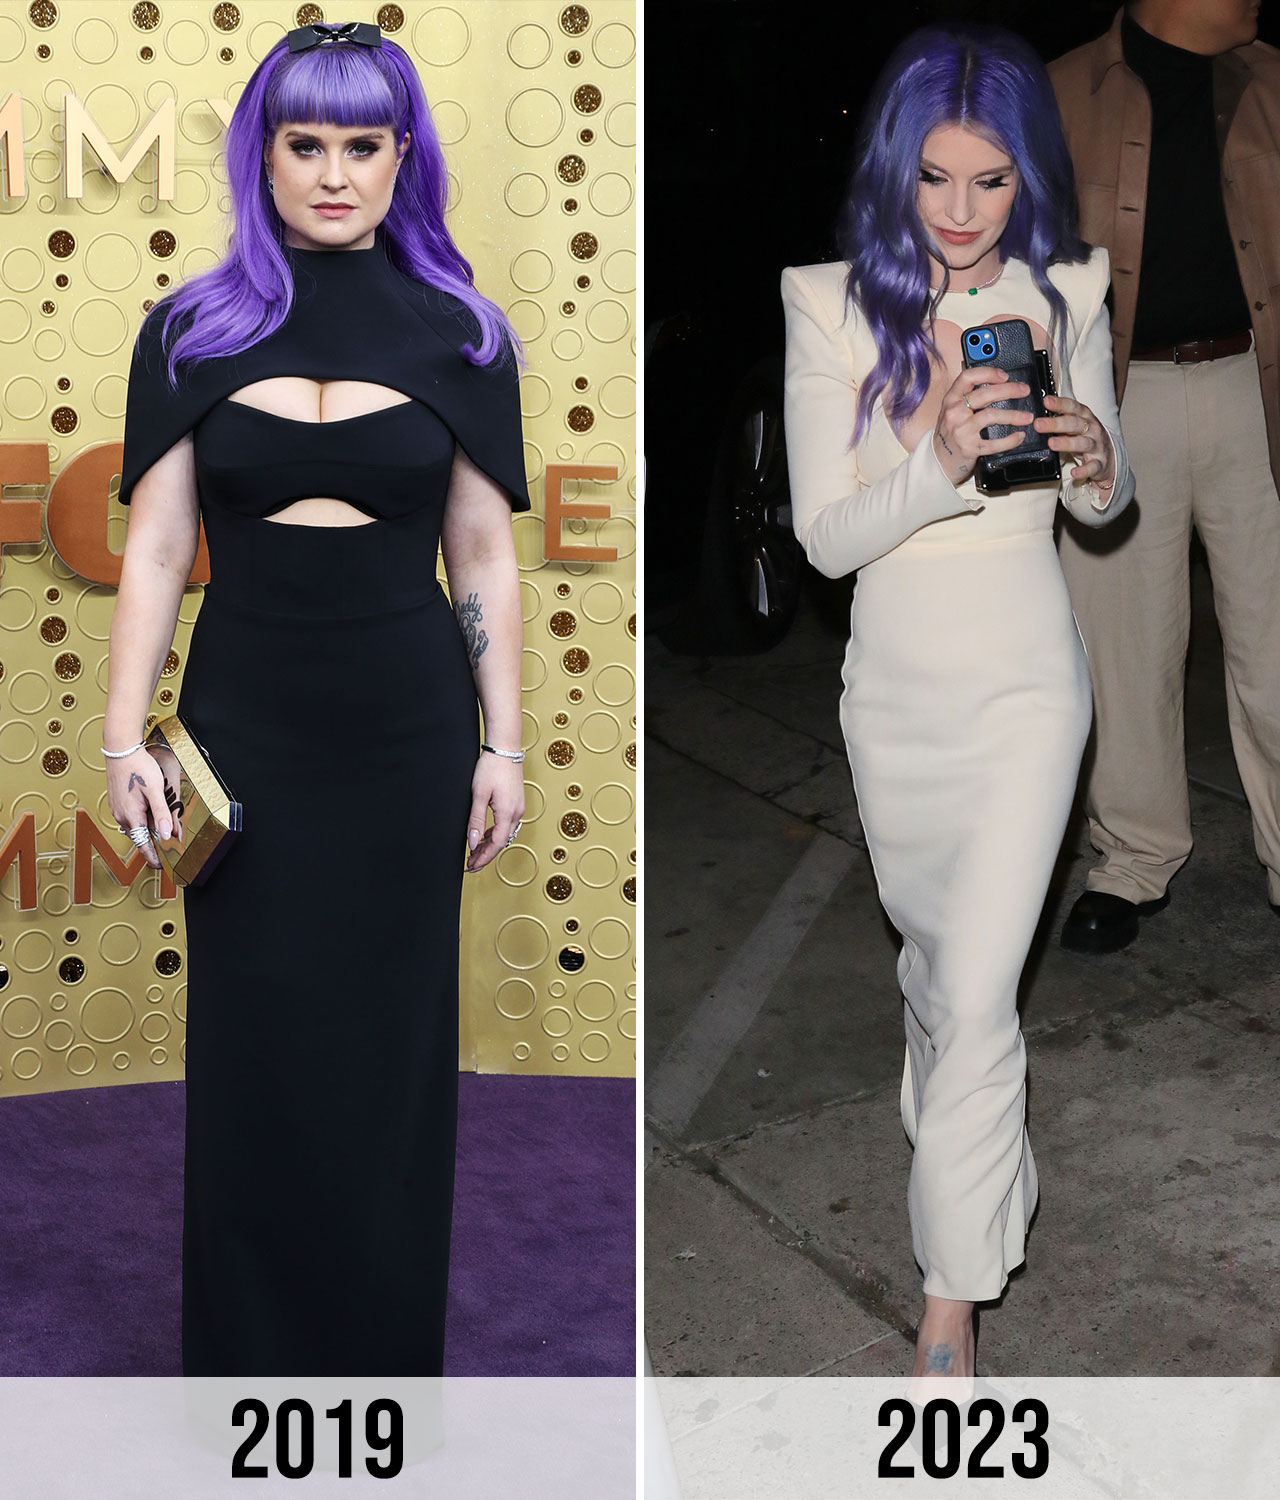 Kelly Osbourne weight loss transformation 2019 to 2023